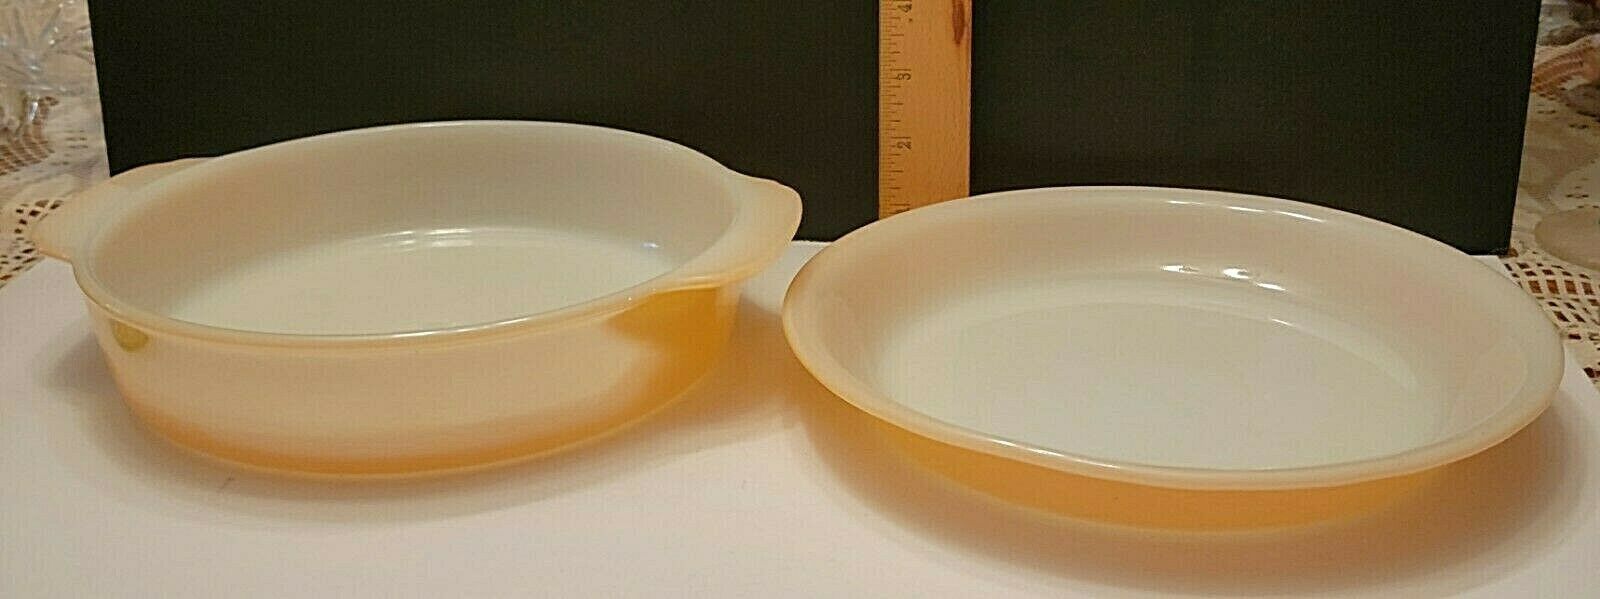 Primary image for ANCHOR HOCKING FIRE KING PEACH LUSTER PIE BAKING DISH  & NO 450 BAKING DISH